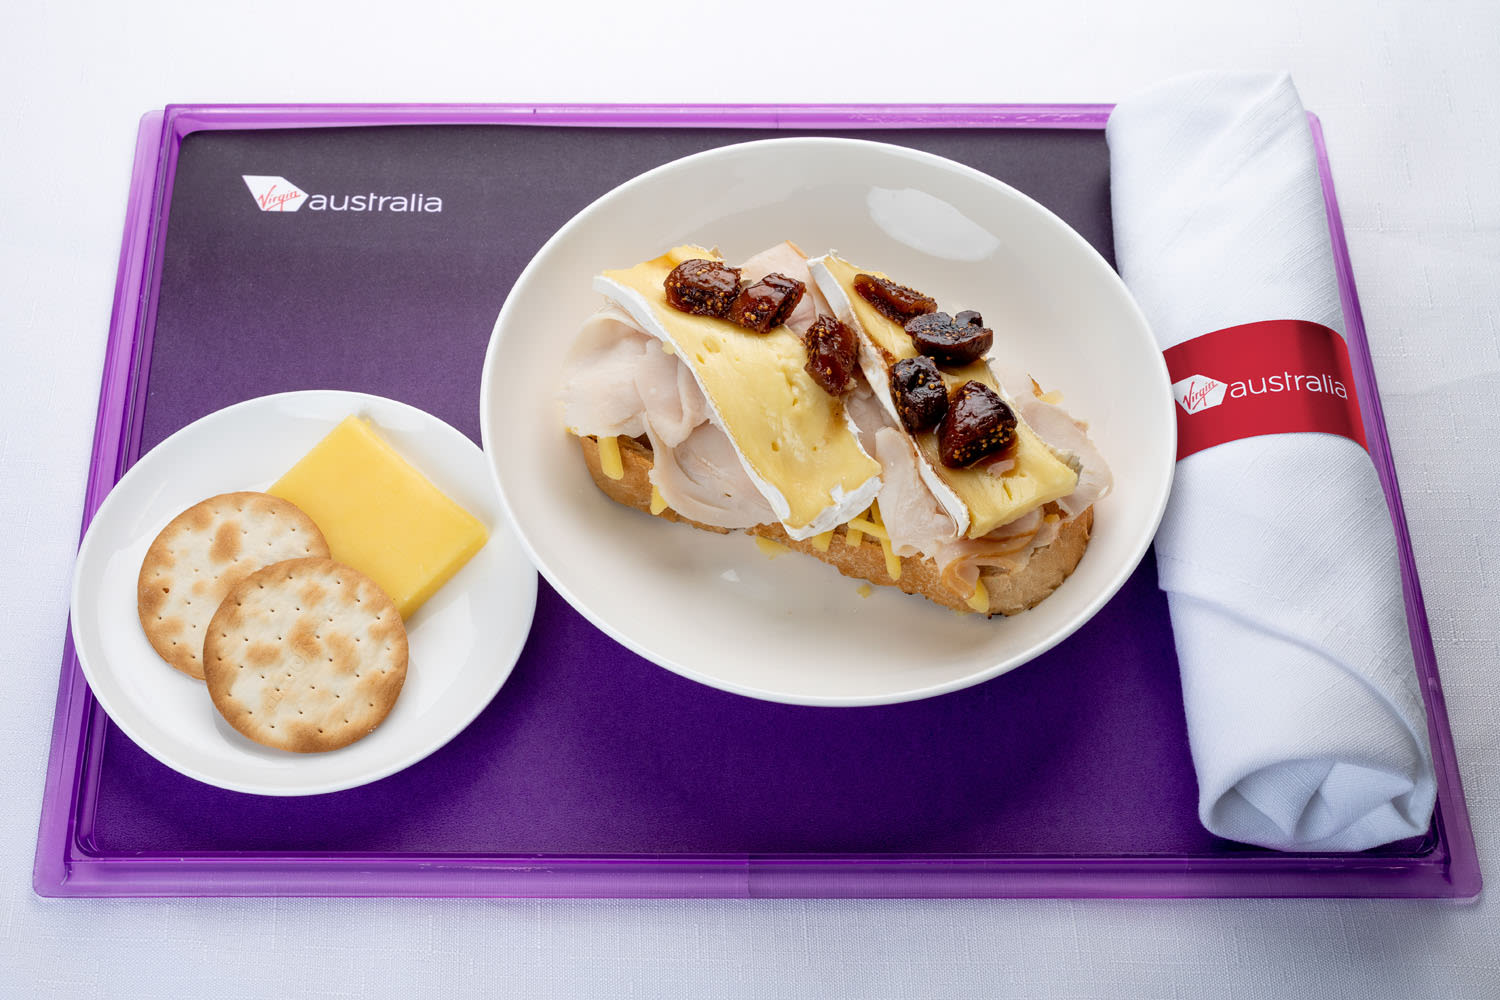 Turkey, brie and fig jam sourdough melt served with cheese and crackers Business Class offering Virgin Australia